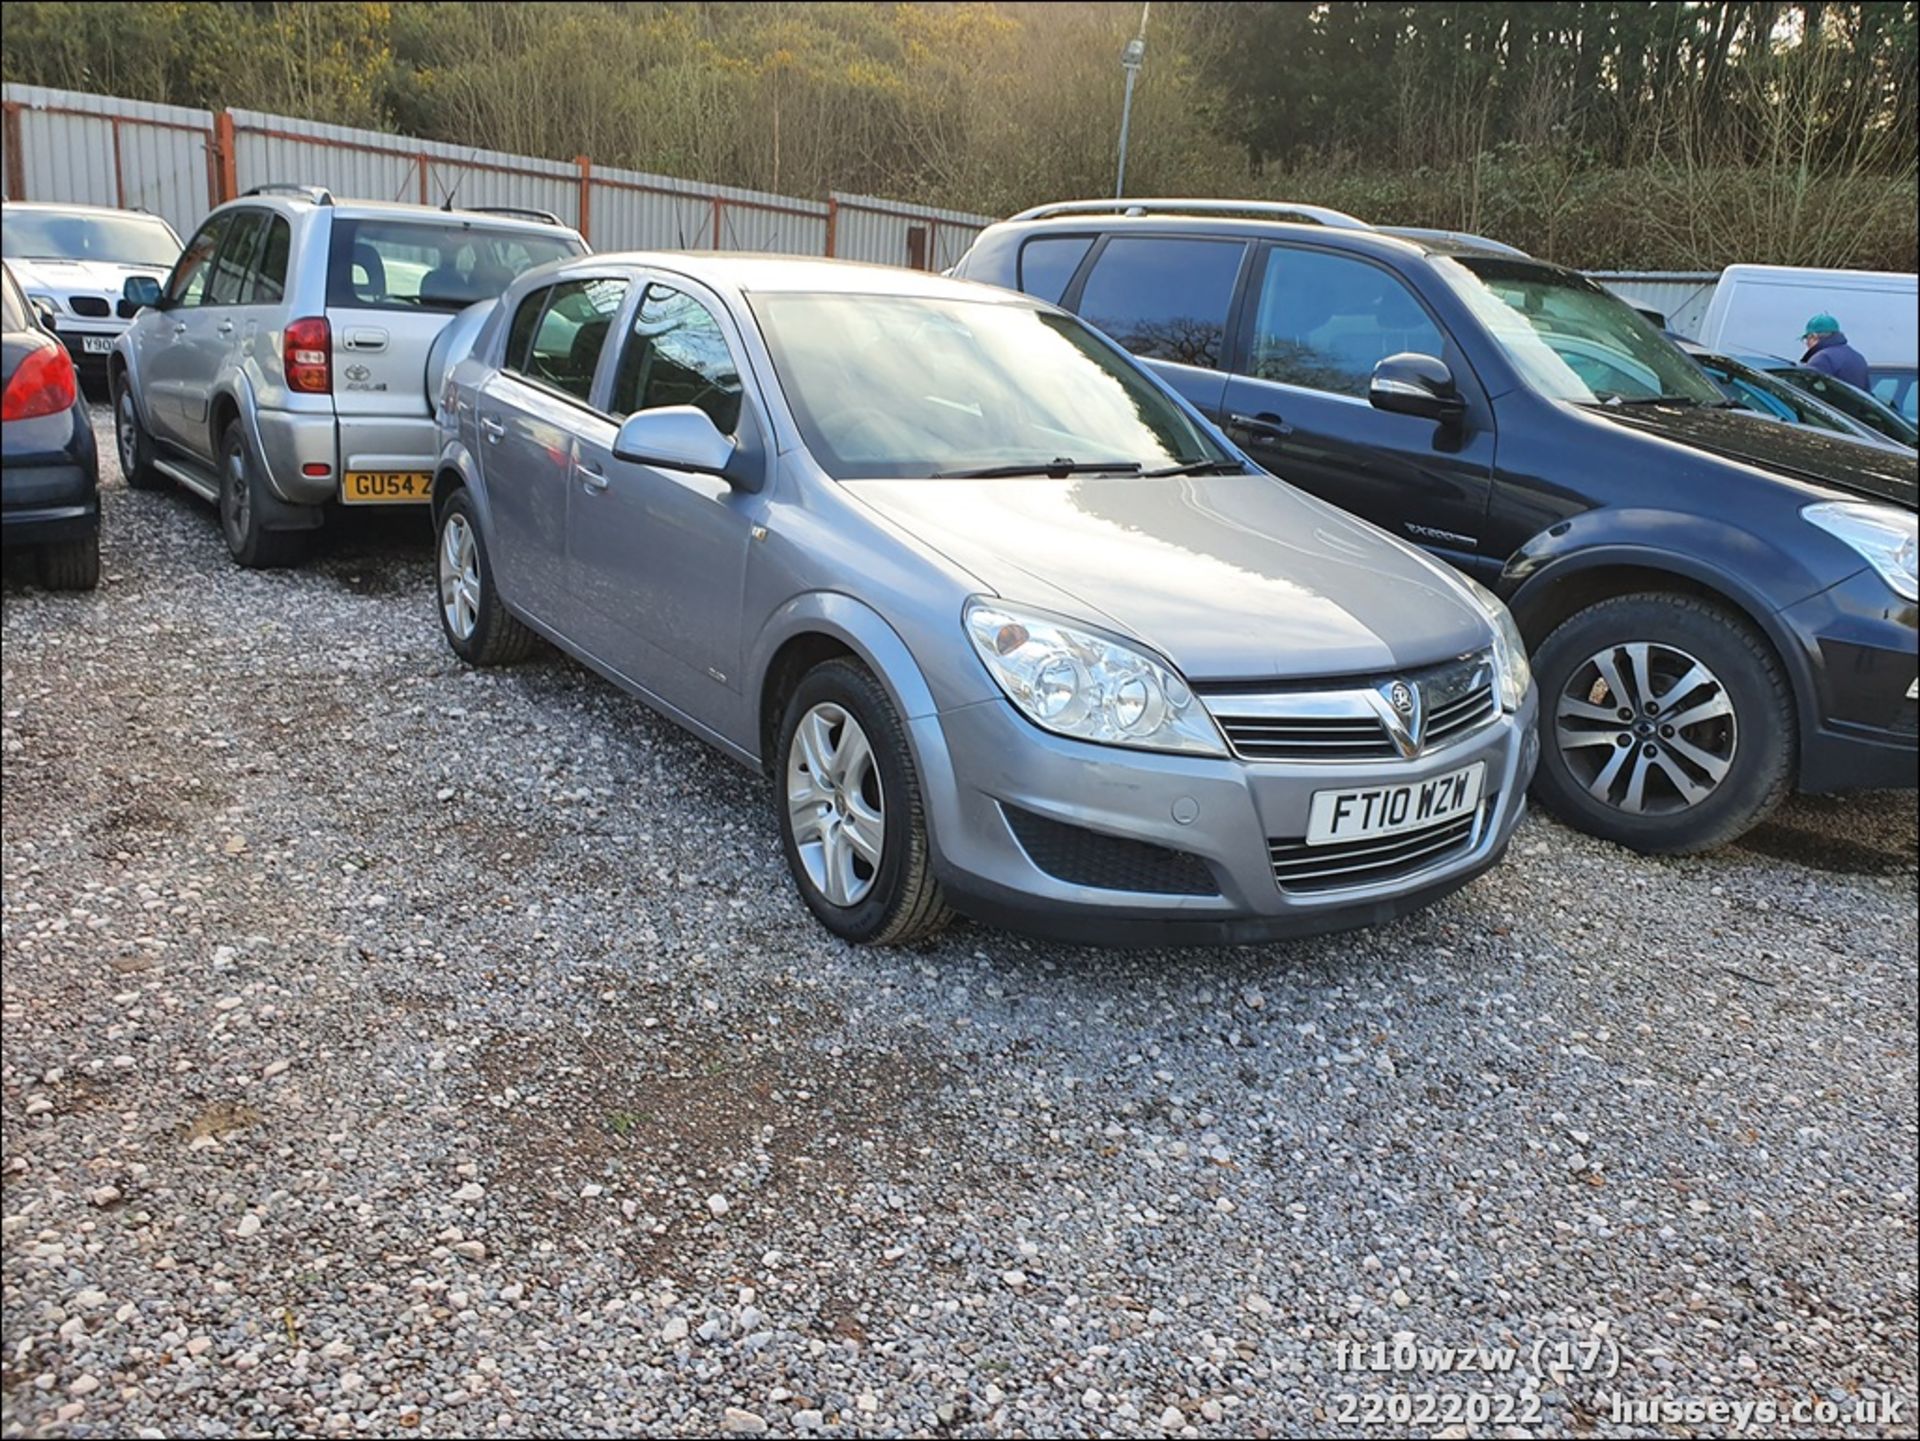 10/10 VAUXHALL ASTRA CLUB - 1364cc 5dr Hatchback (Silver) - Image 18 of 29